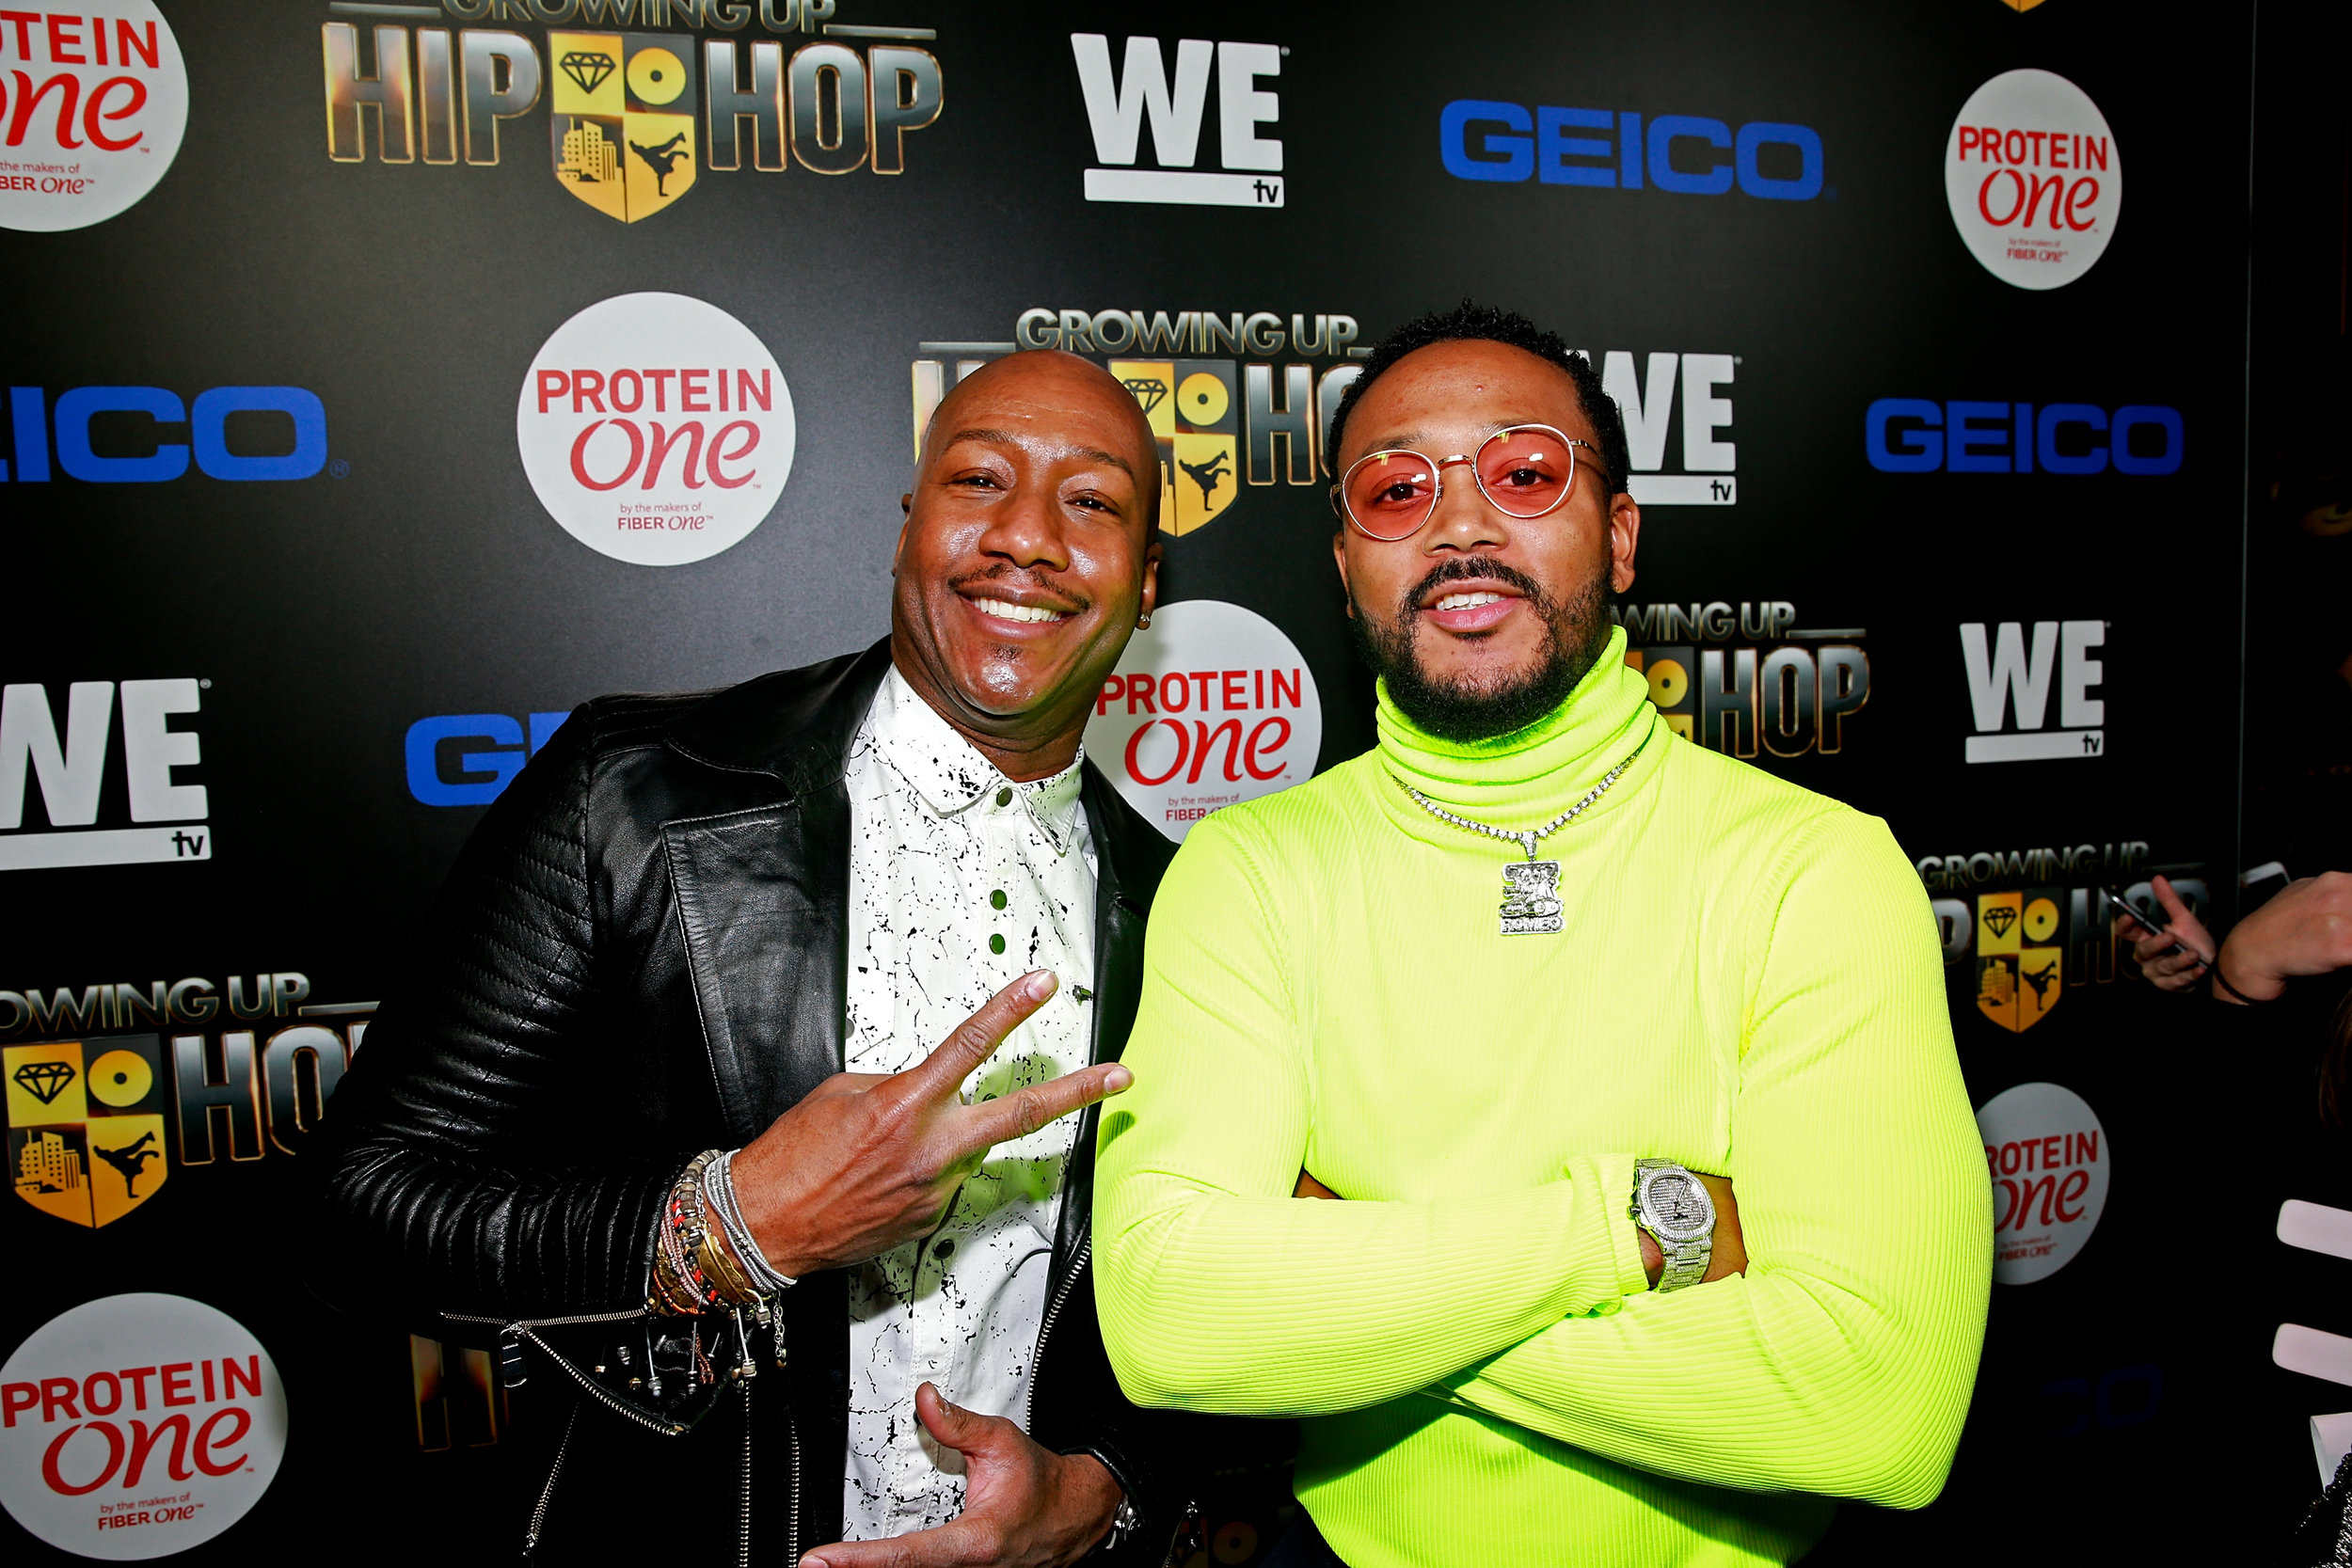  TV personality Dr. Ish (“Marriage Boot Camp”) and Romeo Miller attend the “Growing Up Hip Hop” season 4 party on December 4, 2018 at Avenue in New York City. (Photo by Bennett Raglin/Getty Images for WE tv) 